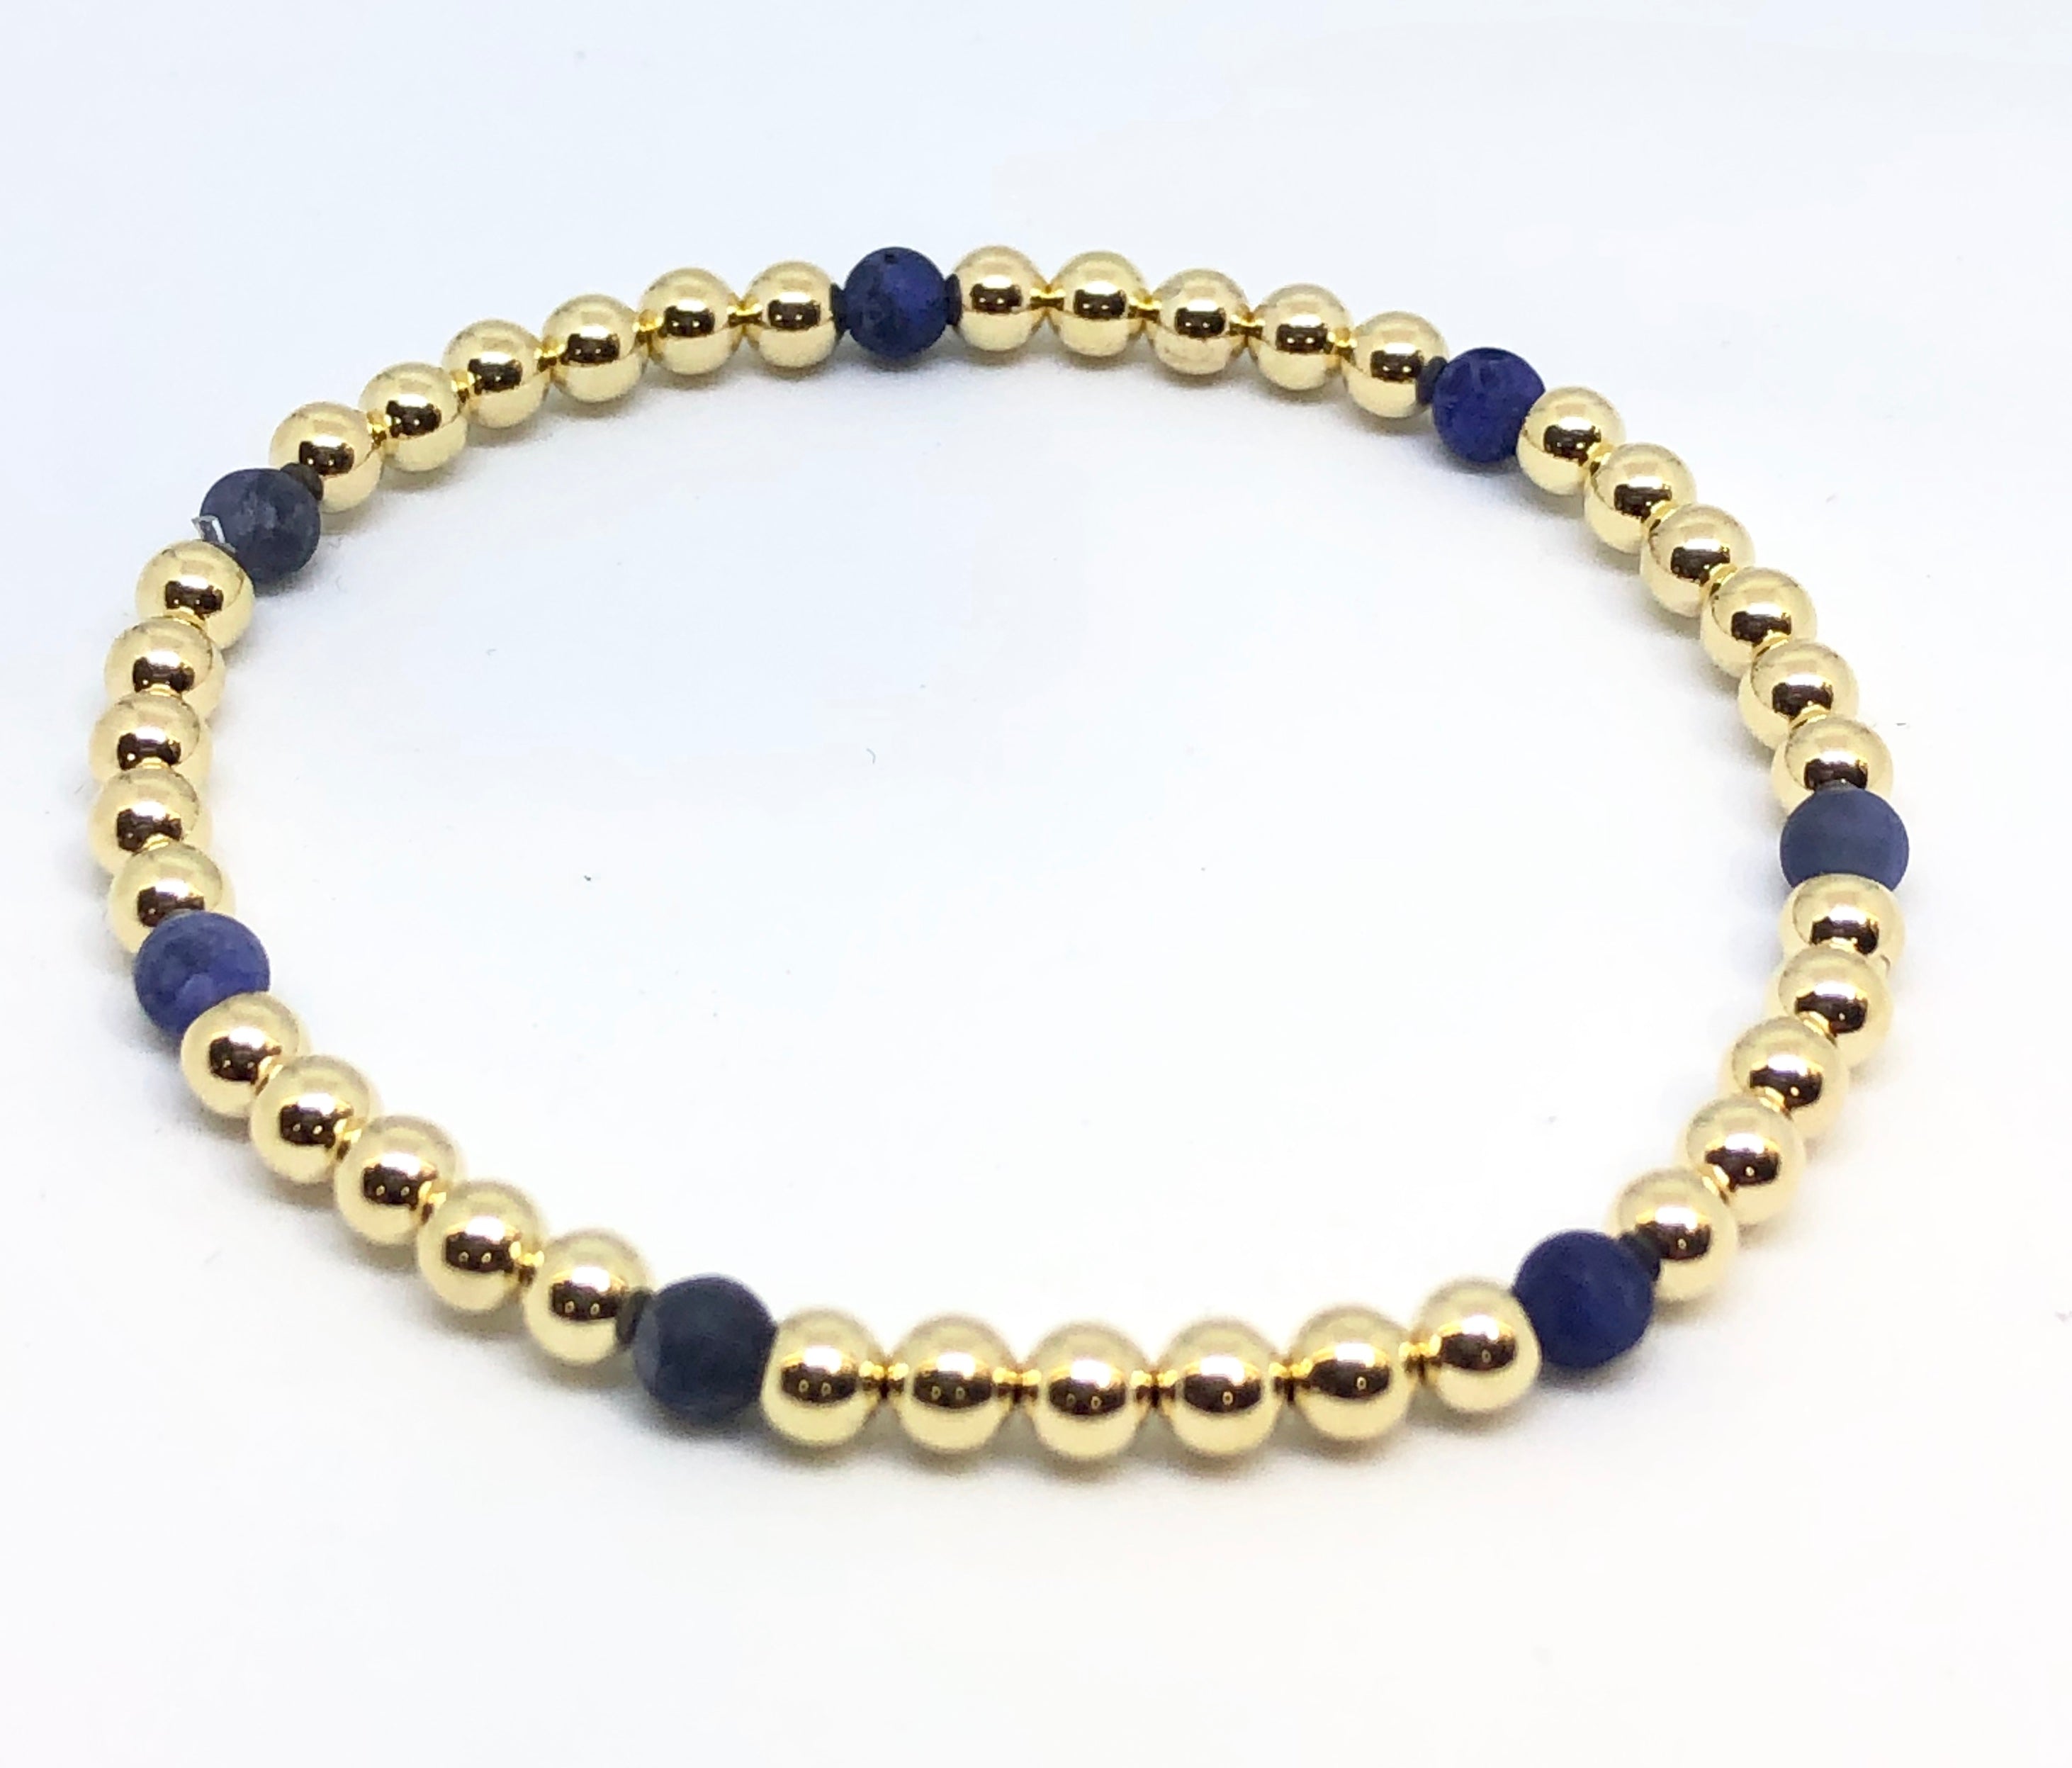 4mm 14kt Gold Filled Bead Bracelet with 7 4mm Blue Agate Beads